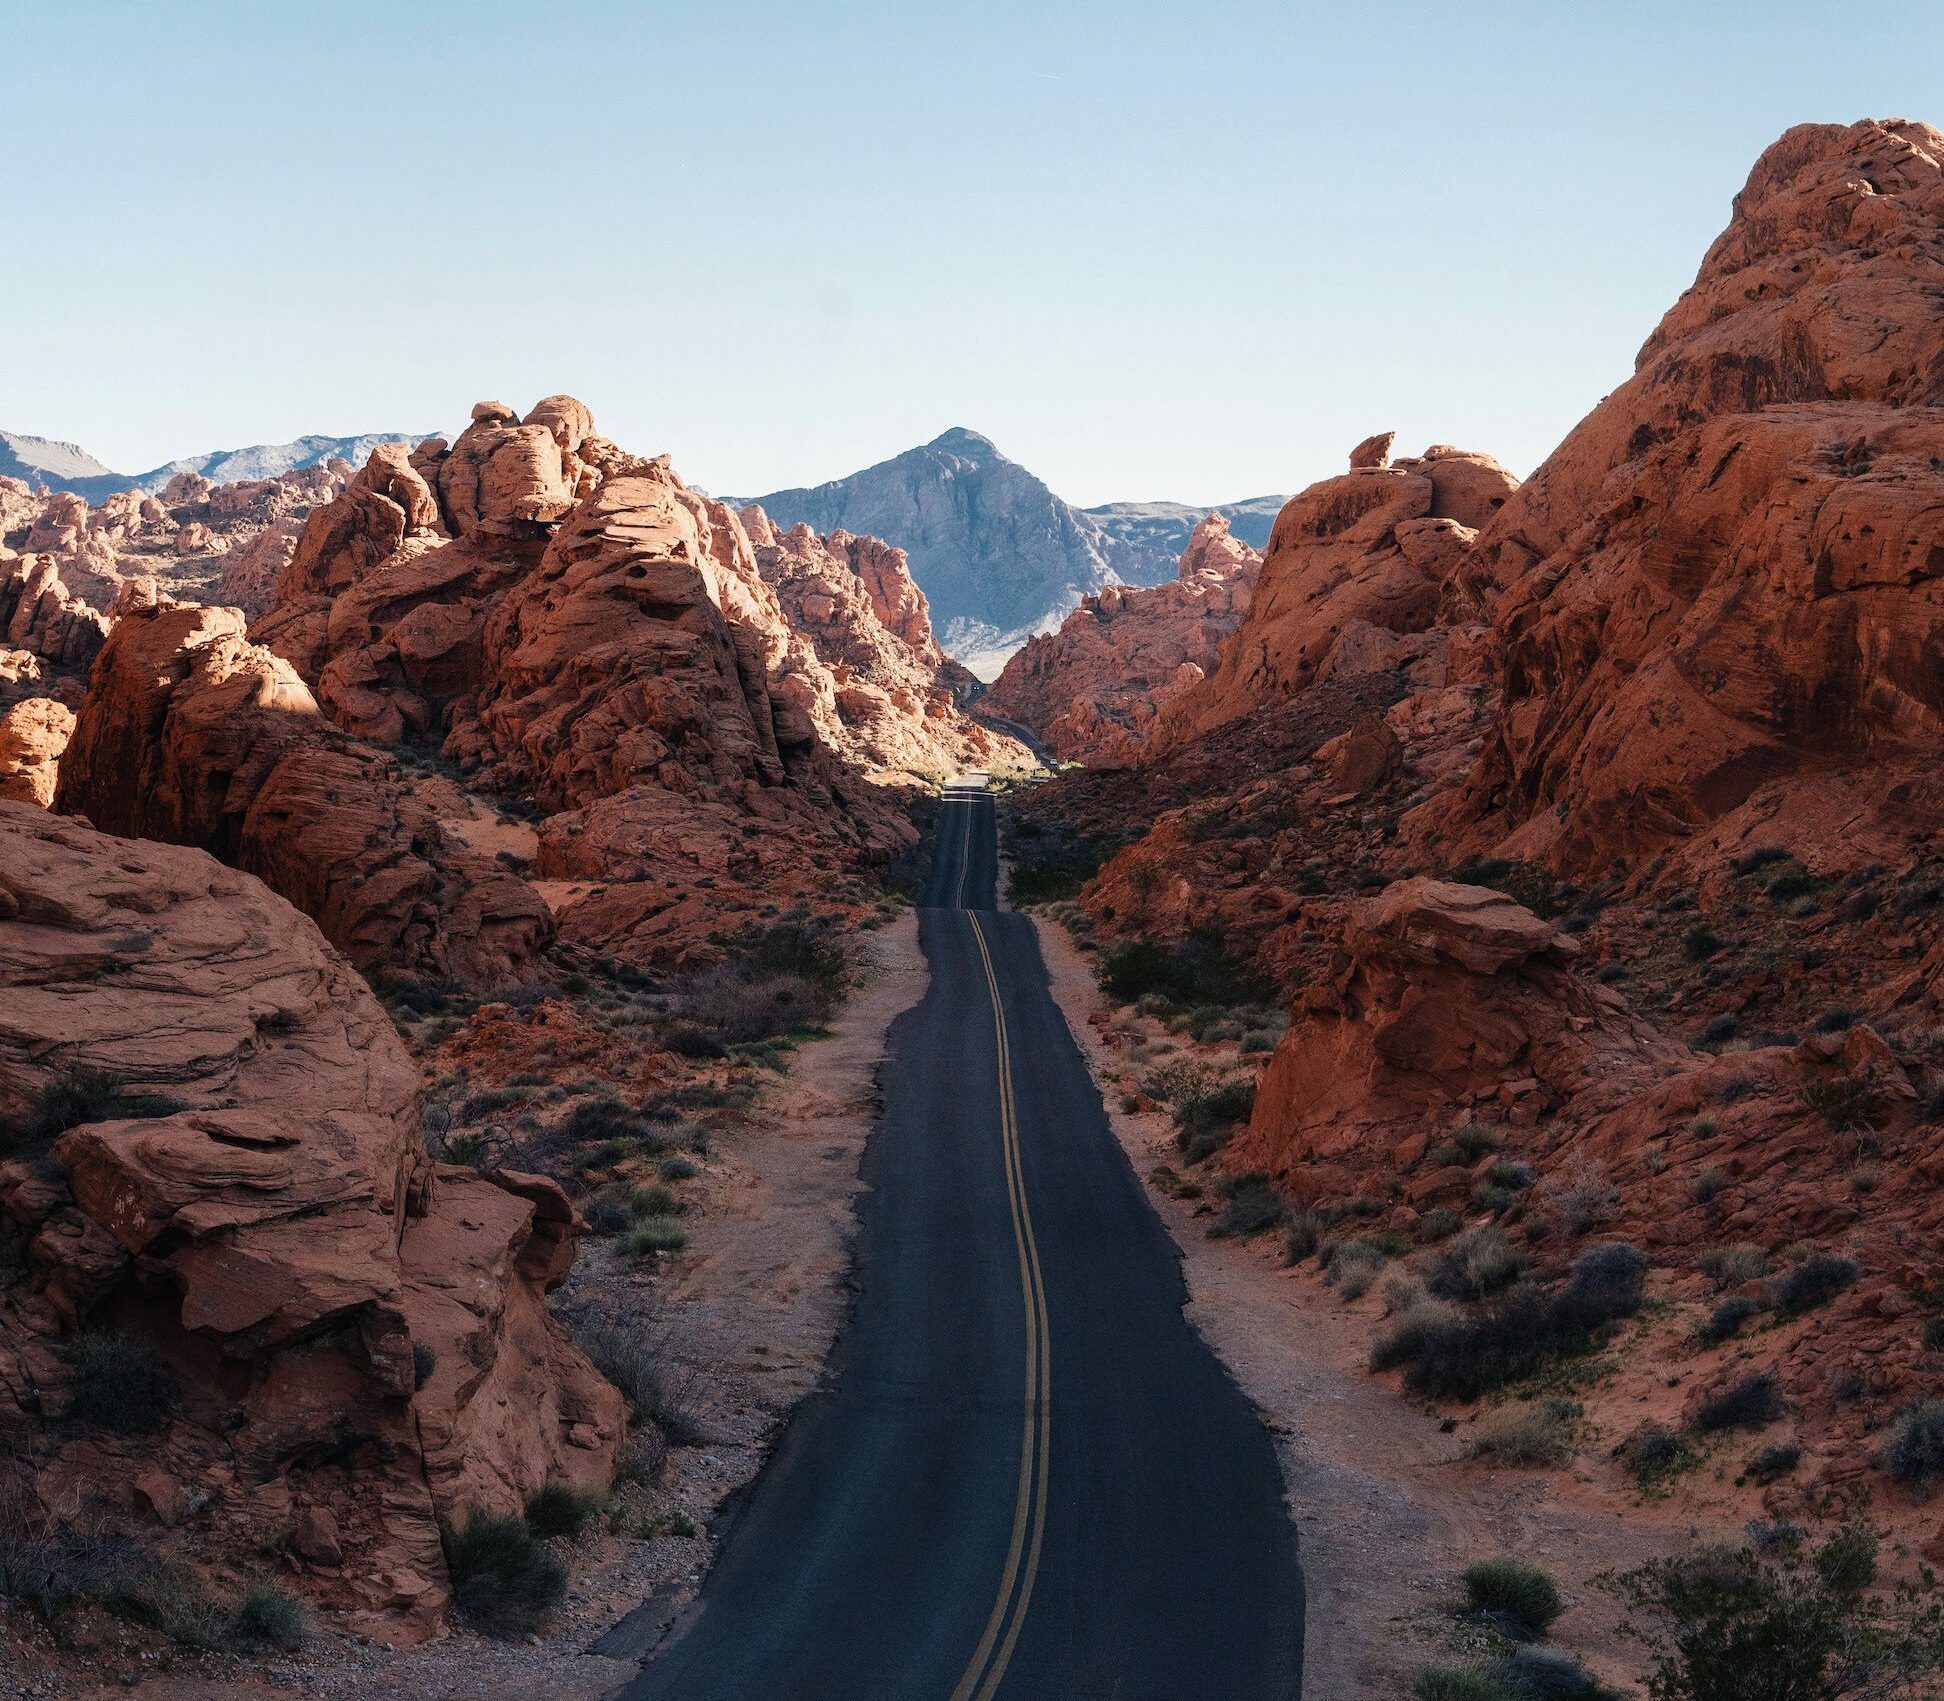 A road stretches through a rocky canyon in the desert.